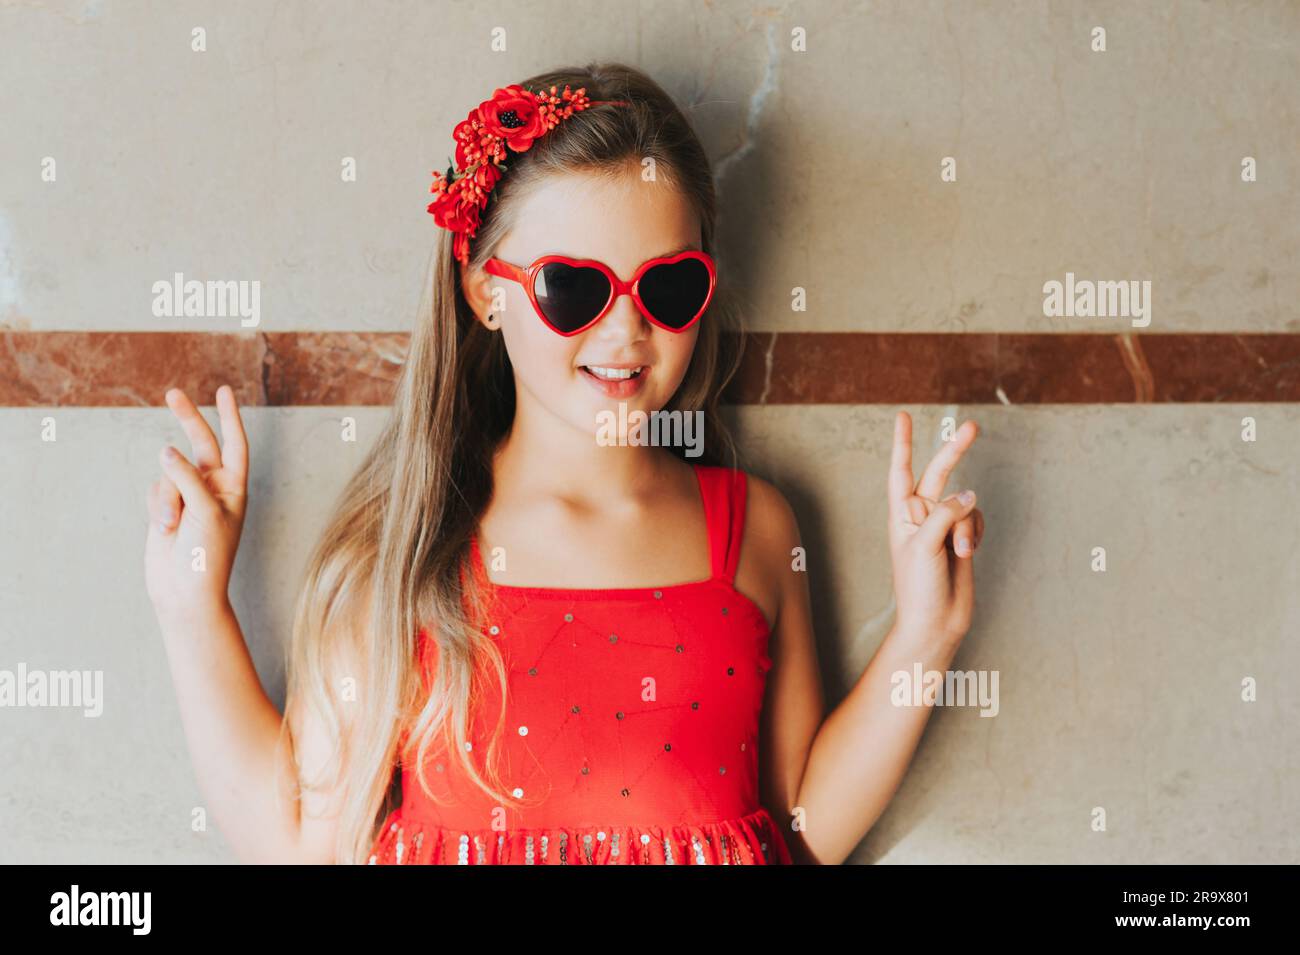 Funny portrait of pretty little girl wearing red dress and heart shaped sunglasses Stock Photo